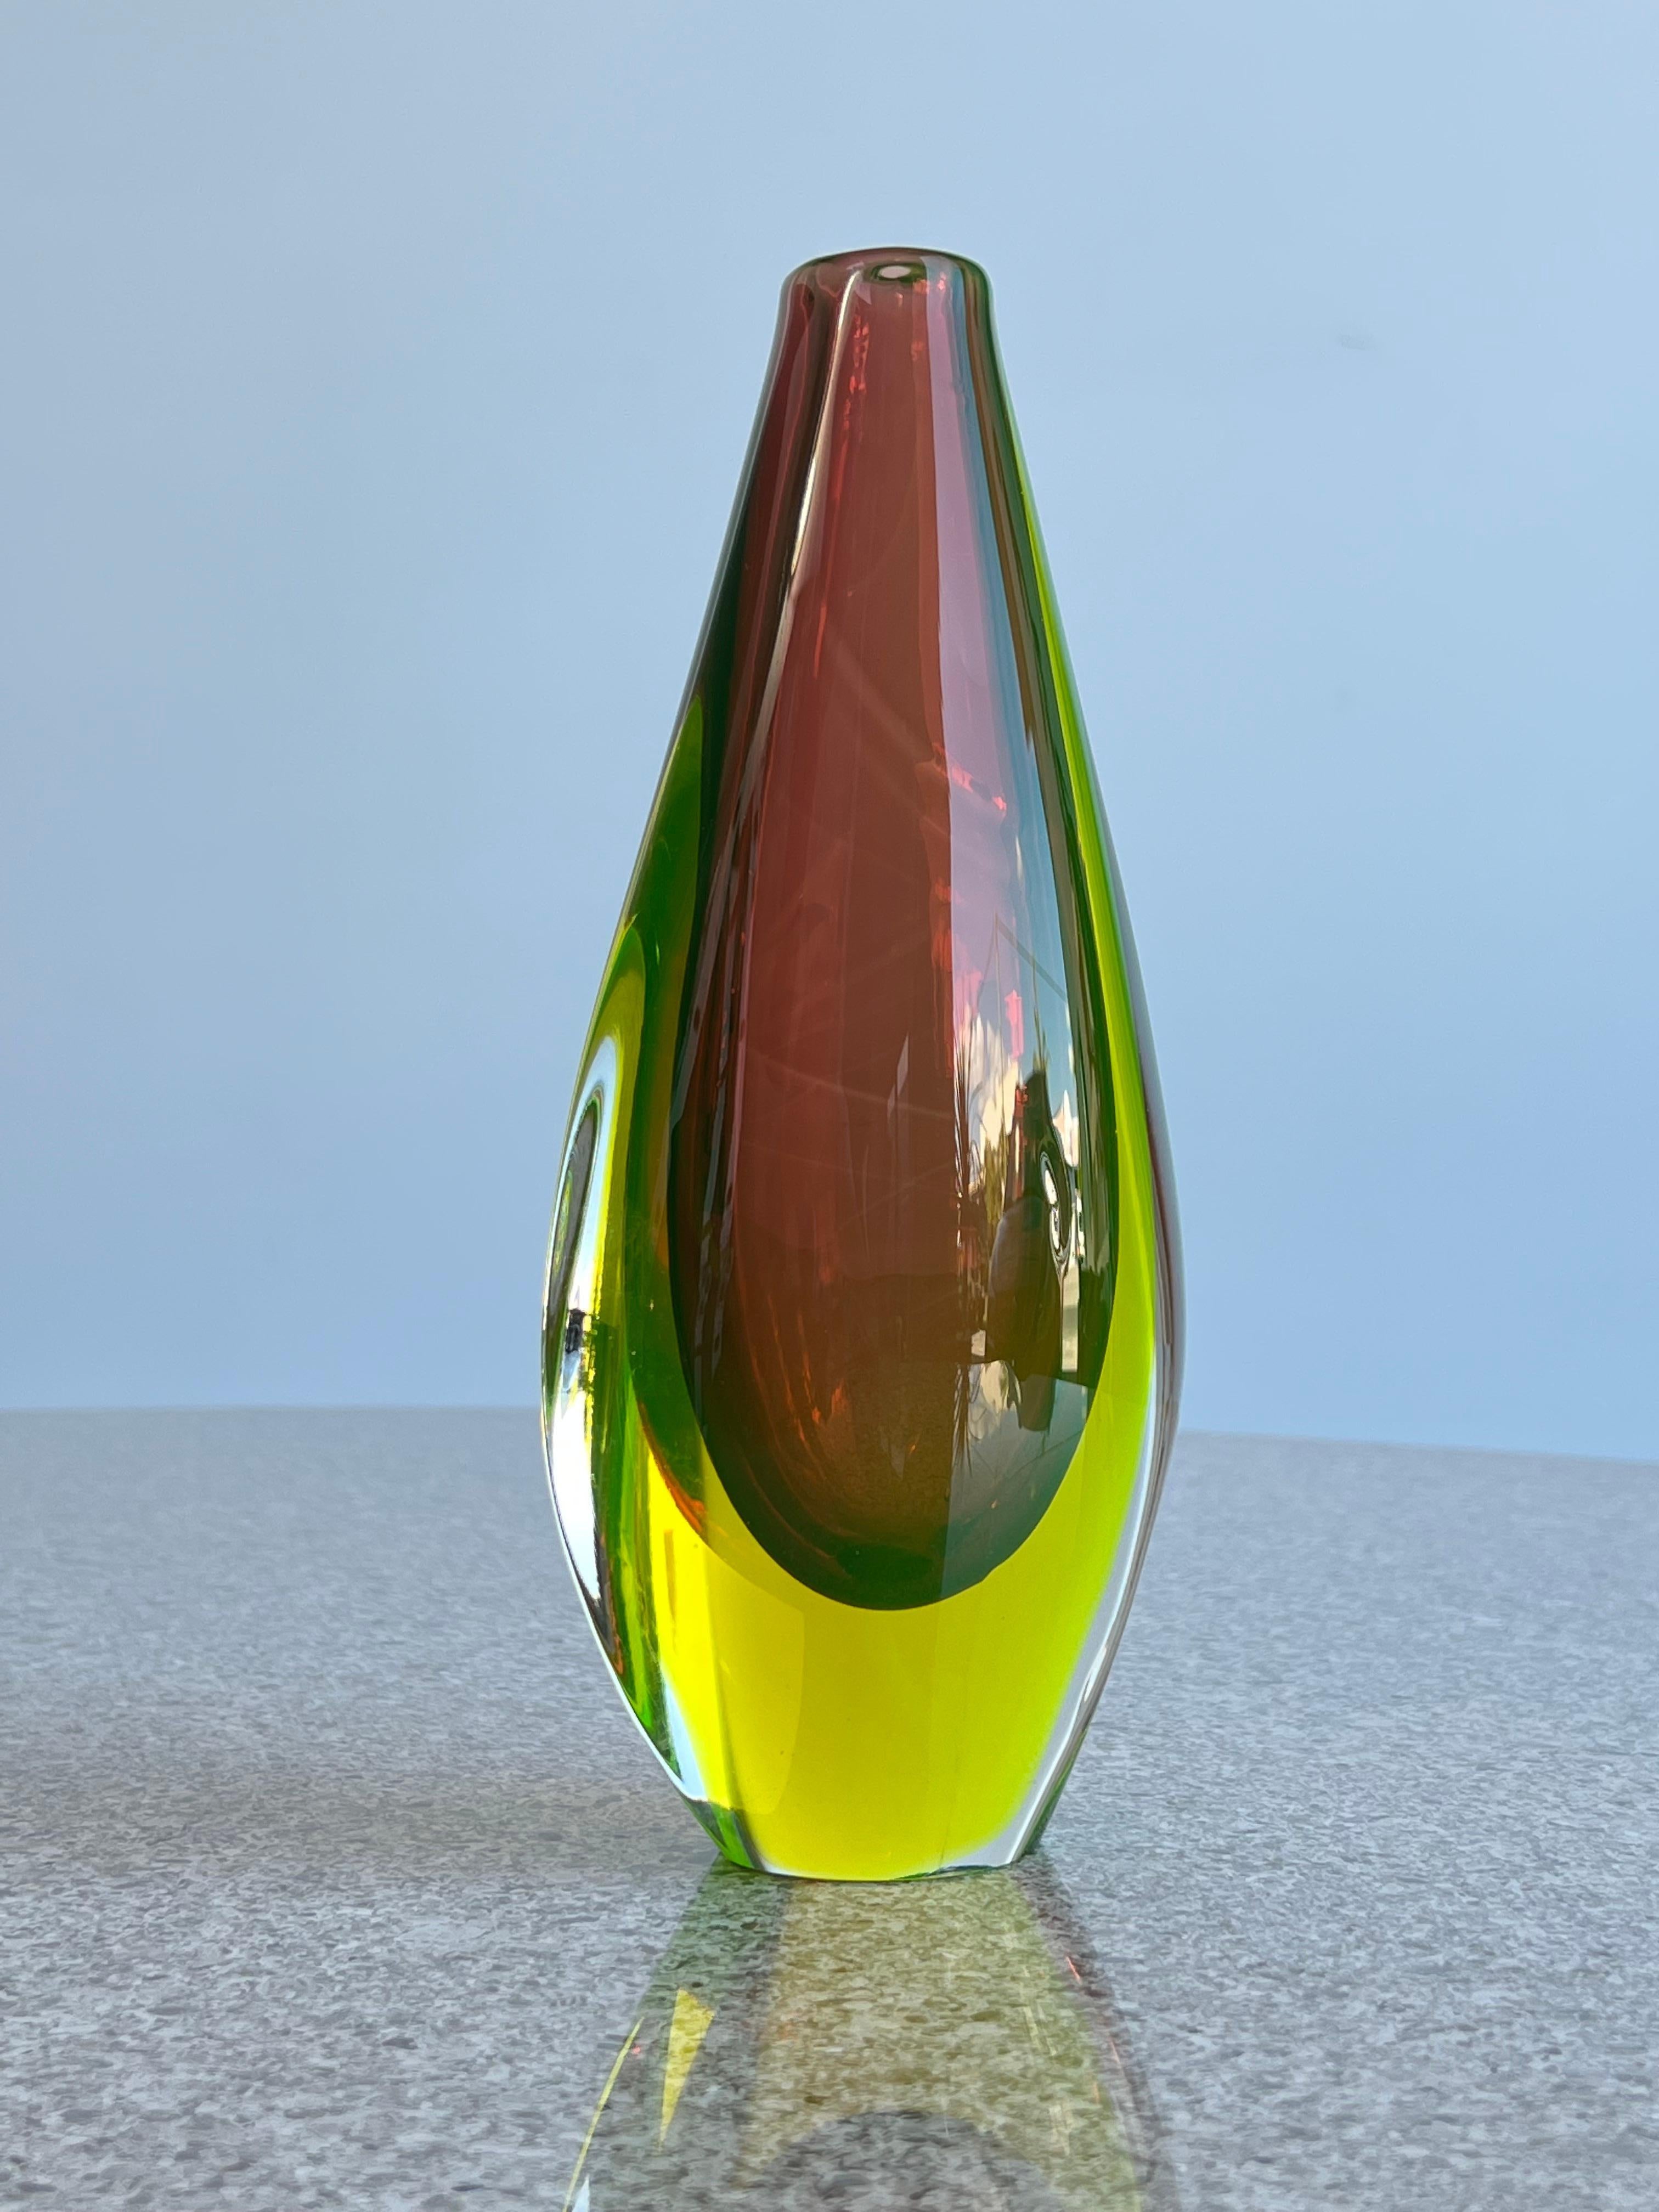 Italian Murano Uranium Green Glass Vase by Flavio Poli 1960s.
Incredible work by Flavio Poli creating this unique colours vase in green, yellow and brown.
